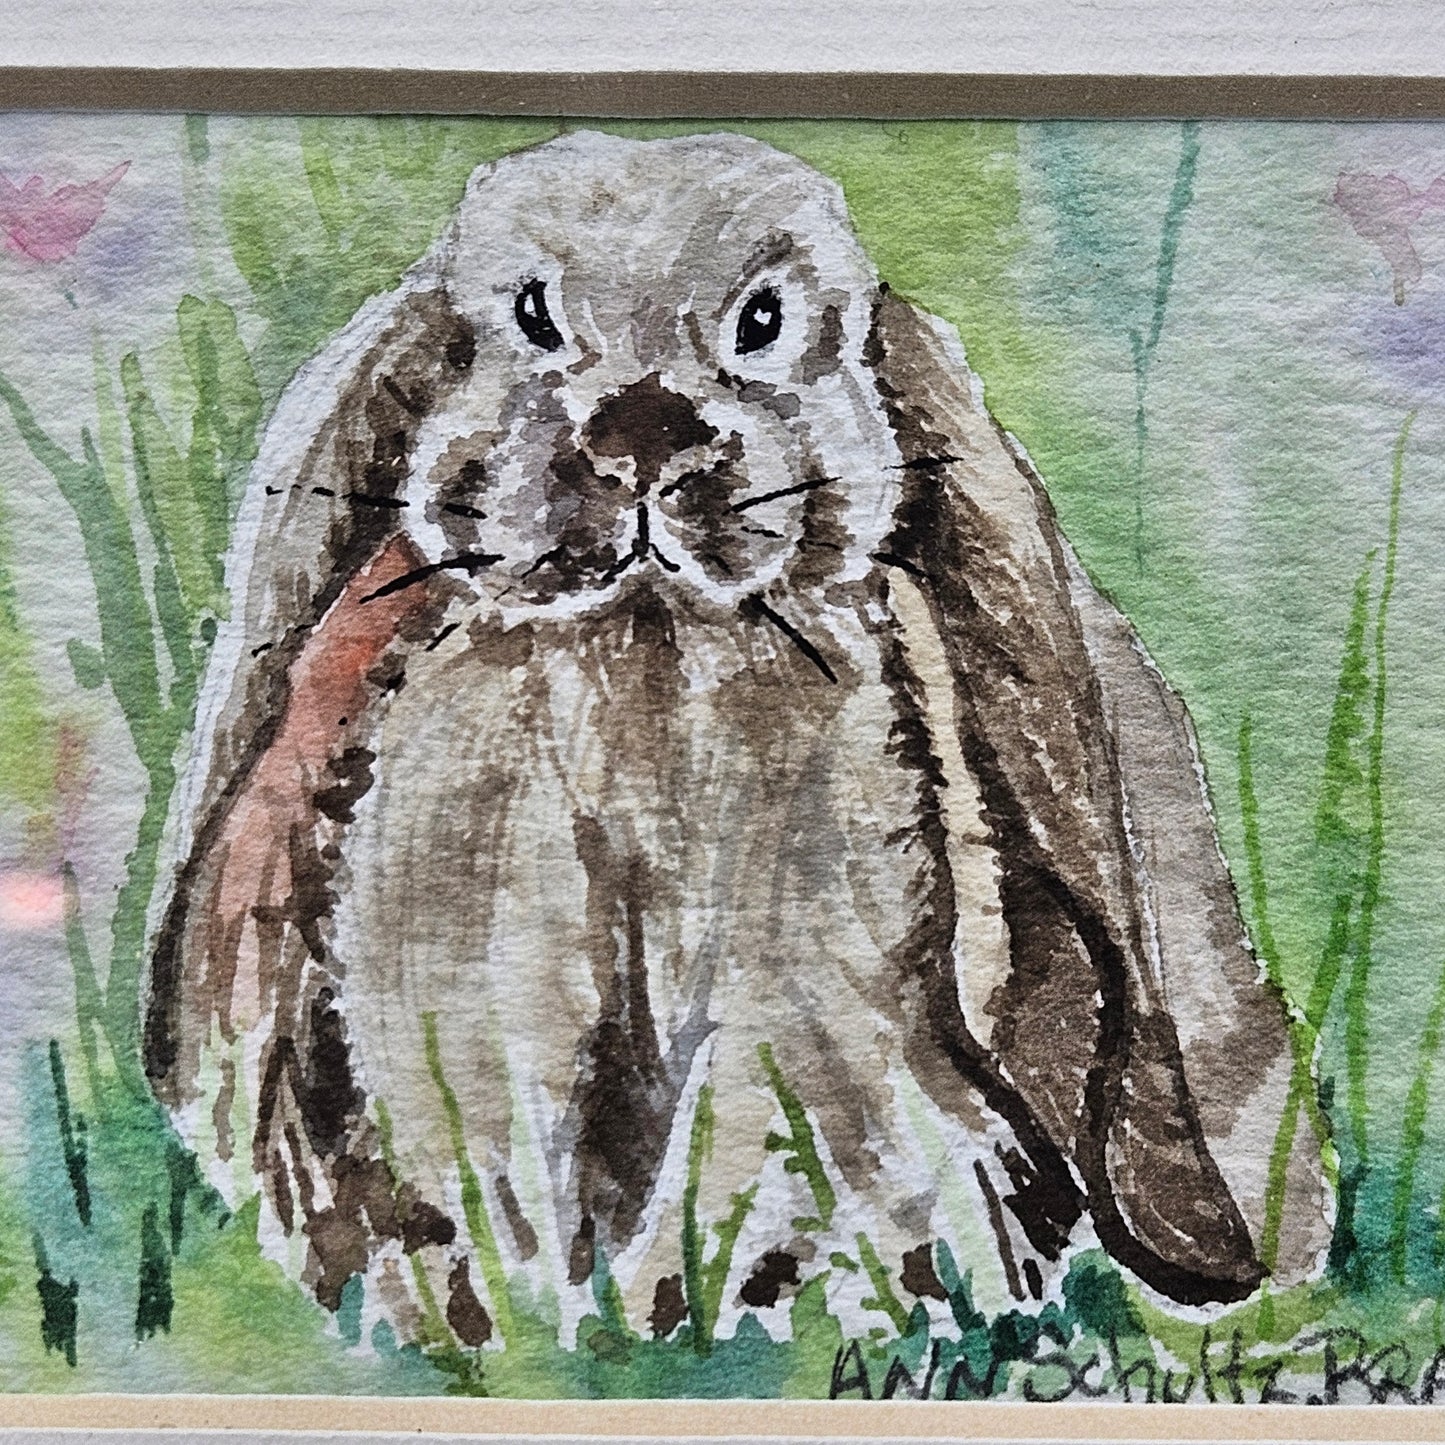 Adorable Signed Small Miniature Watercolor of Floppy Eared Bunny in Gold Frame